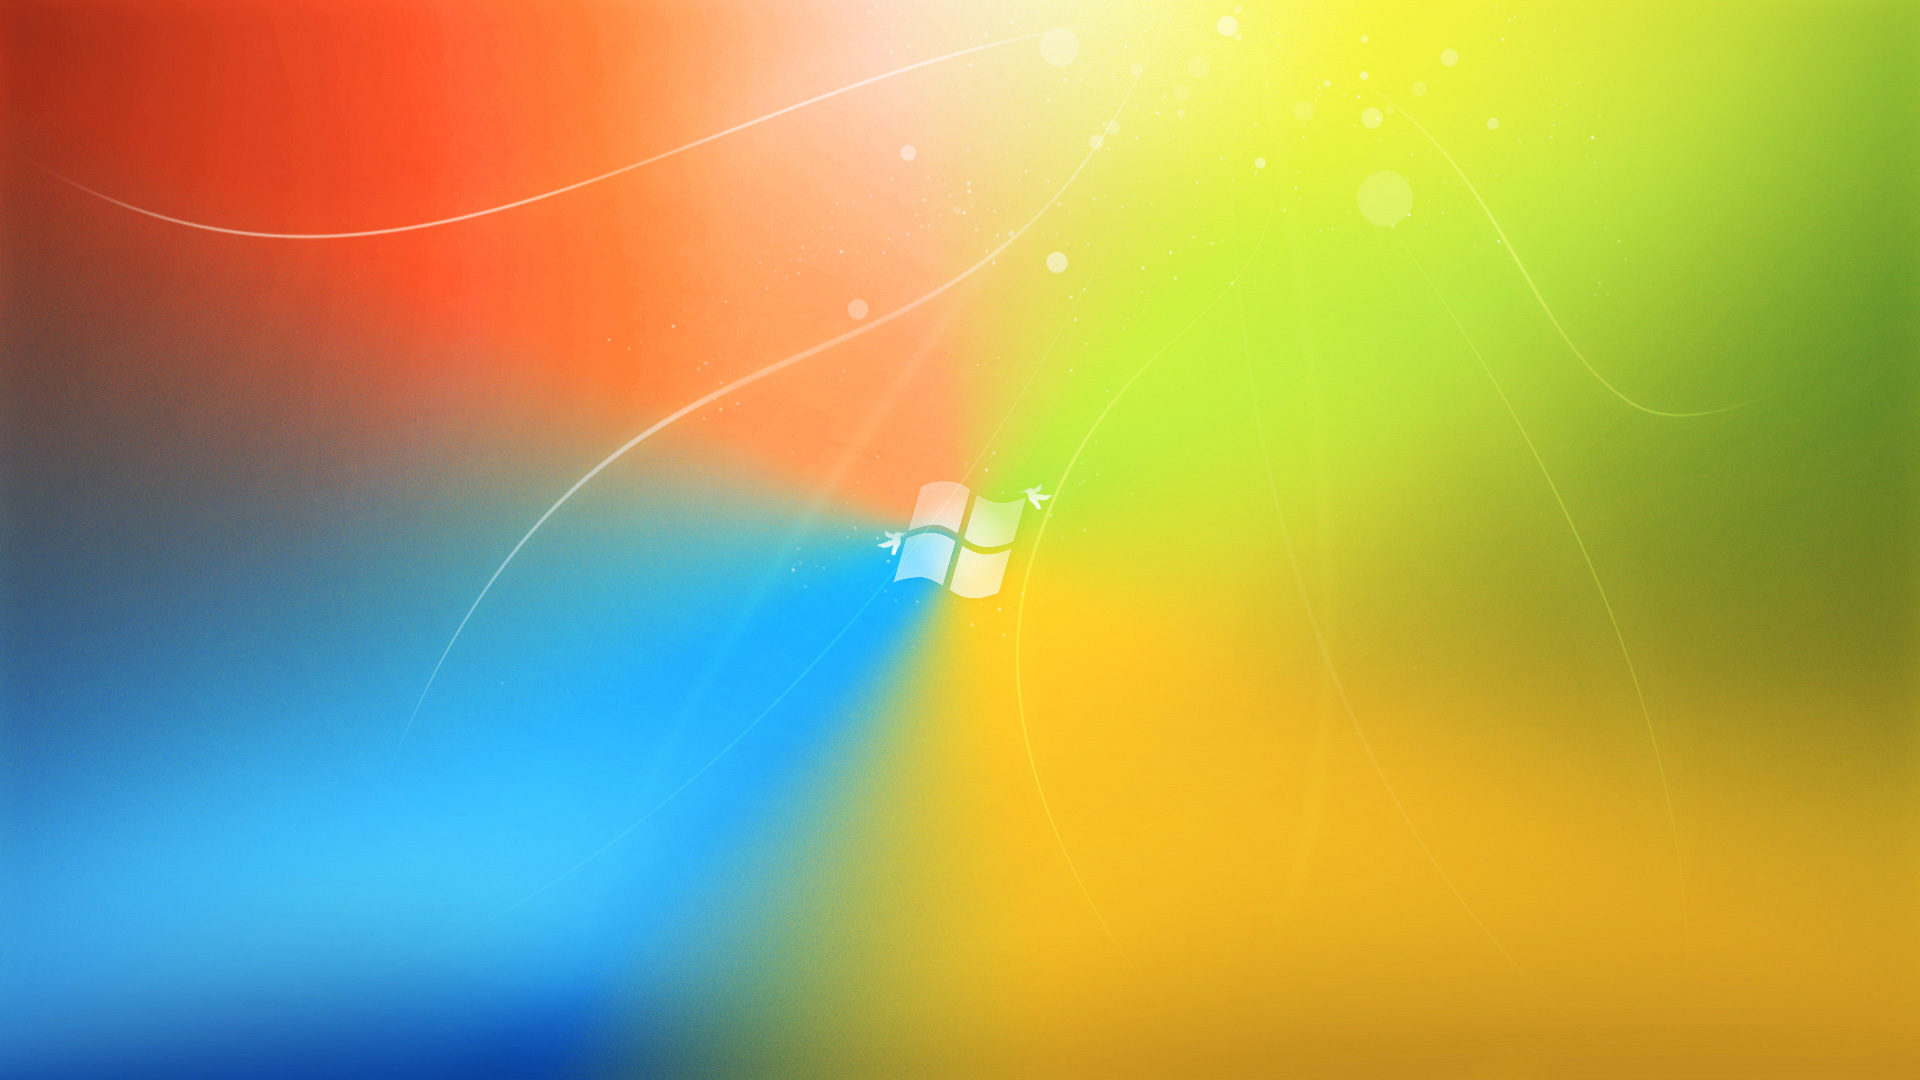 hdwallpapers in colorful windows 7 hd wallpapers html